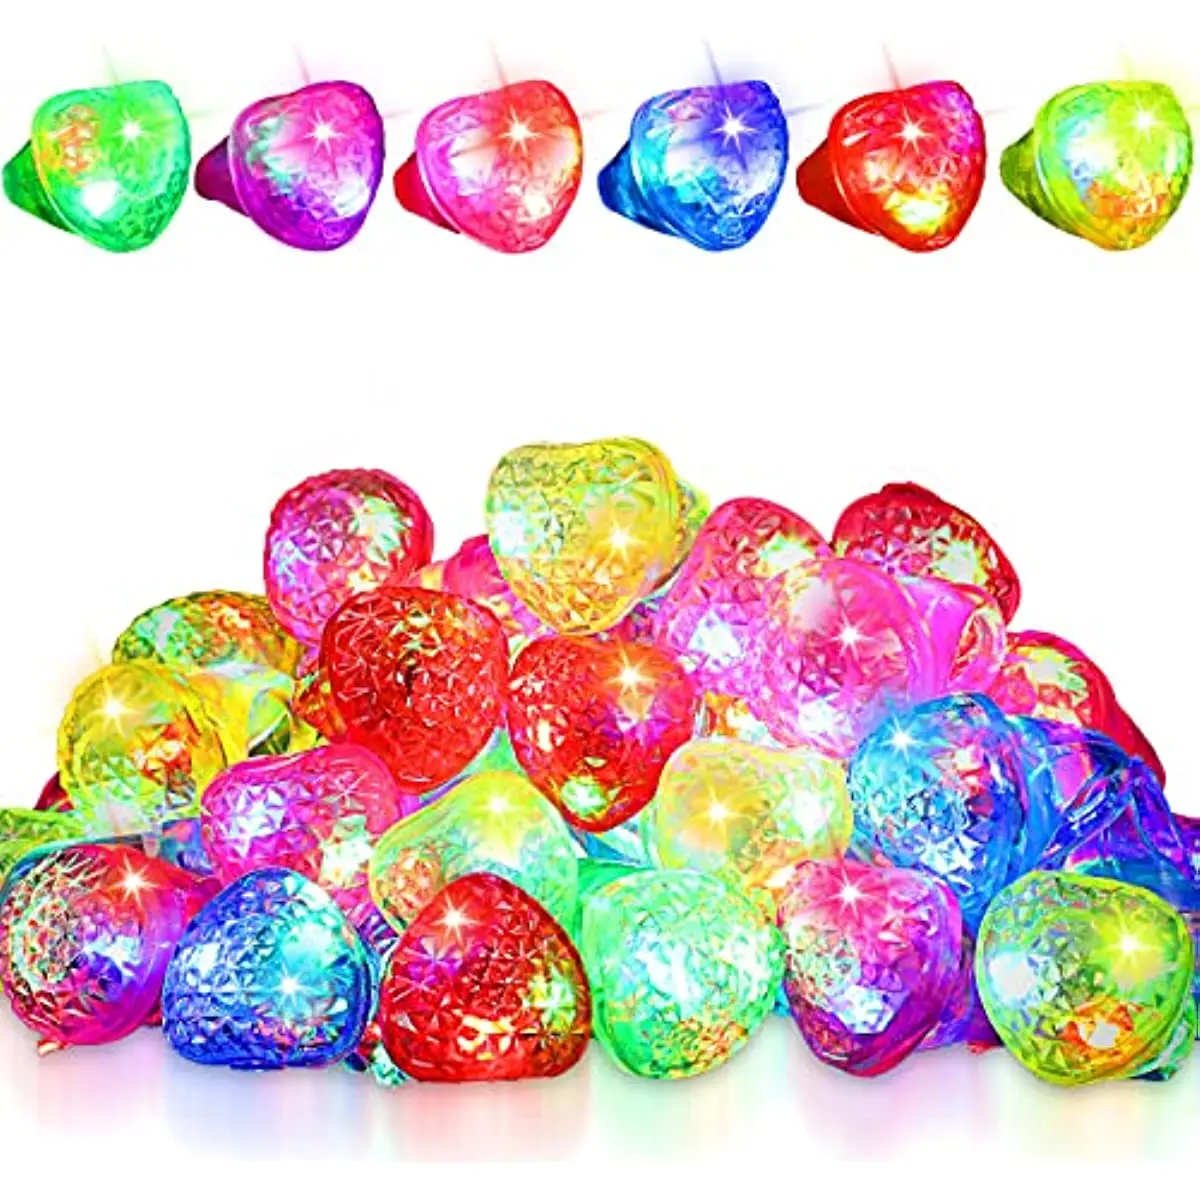 

50Pcs LED Light Up Heart Rings Glowing Heart Shape Ring Colorful Glow Jelly Rubber Rings Wedding Party Favors Gifts Eggs Filler